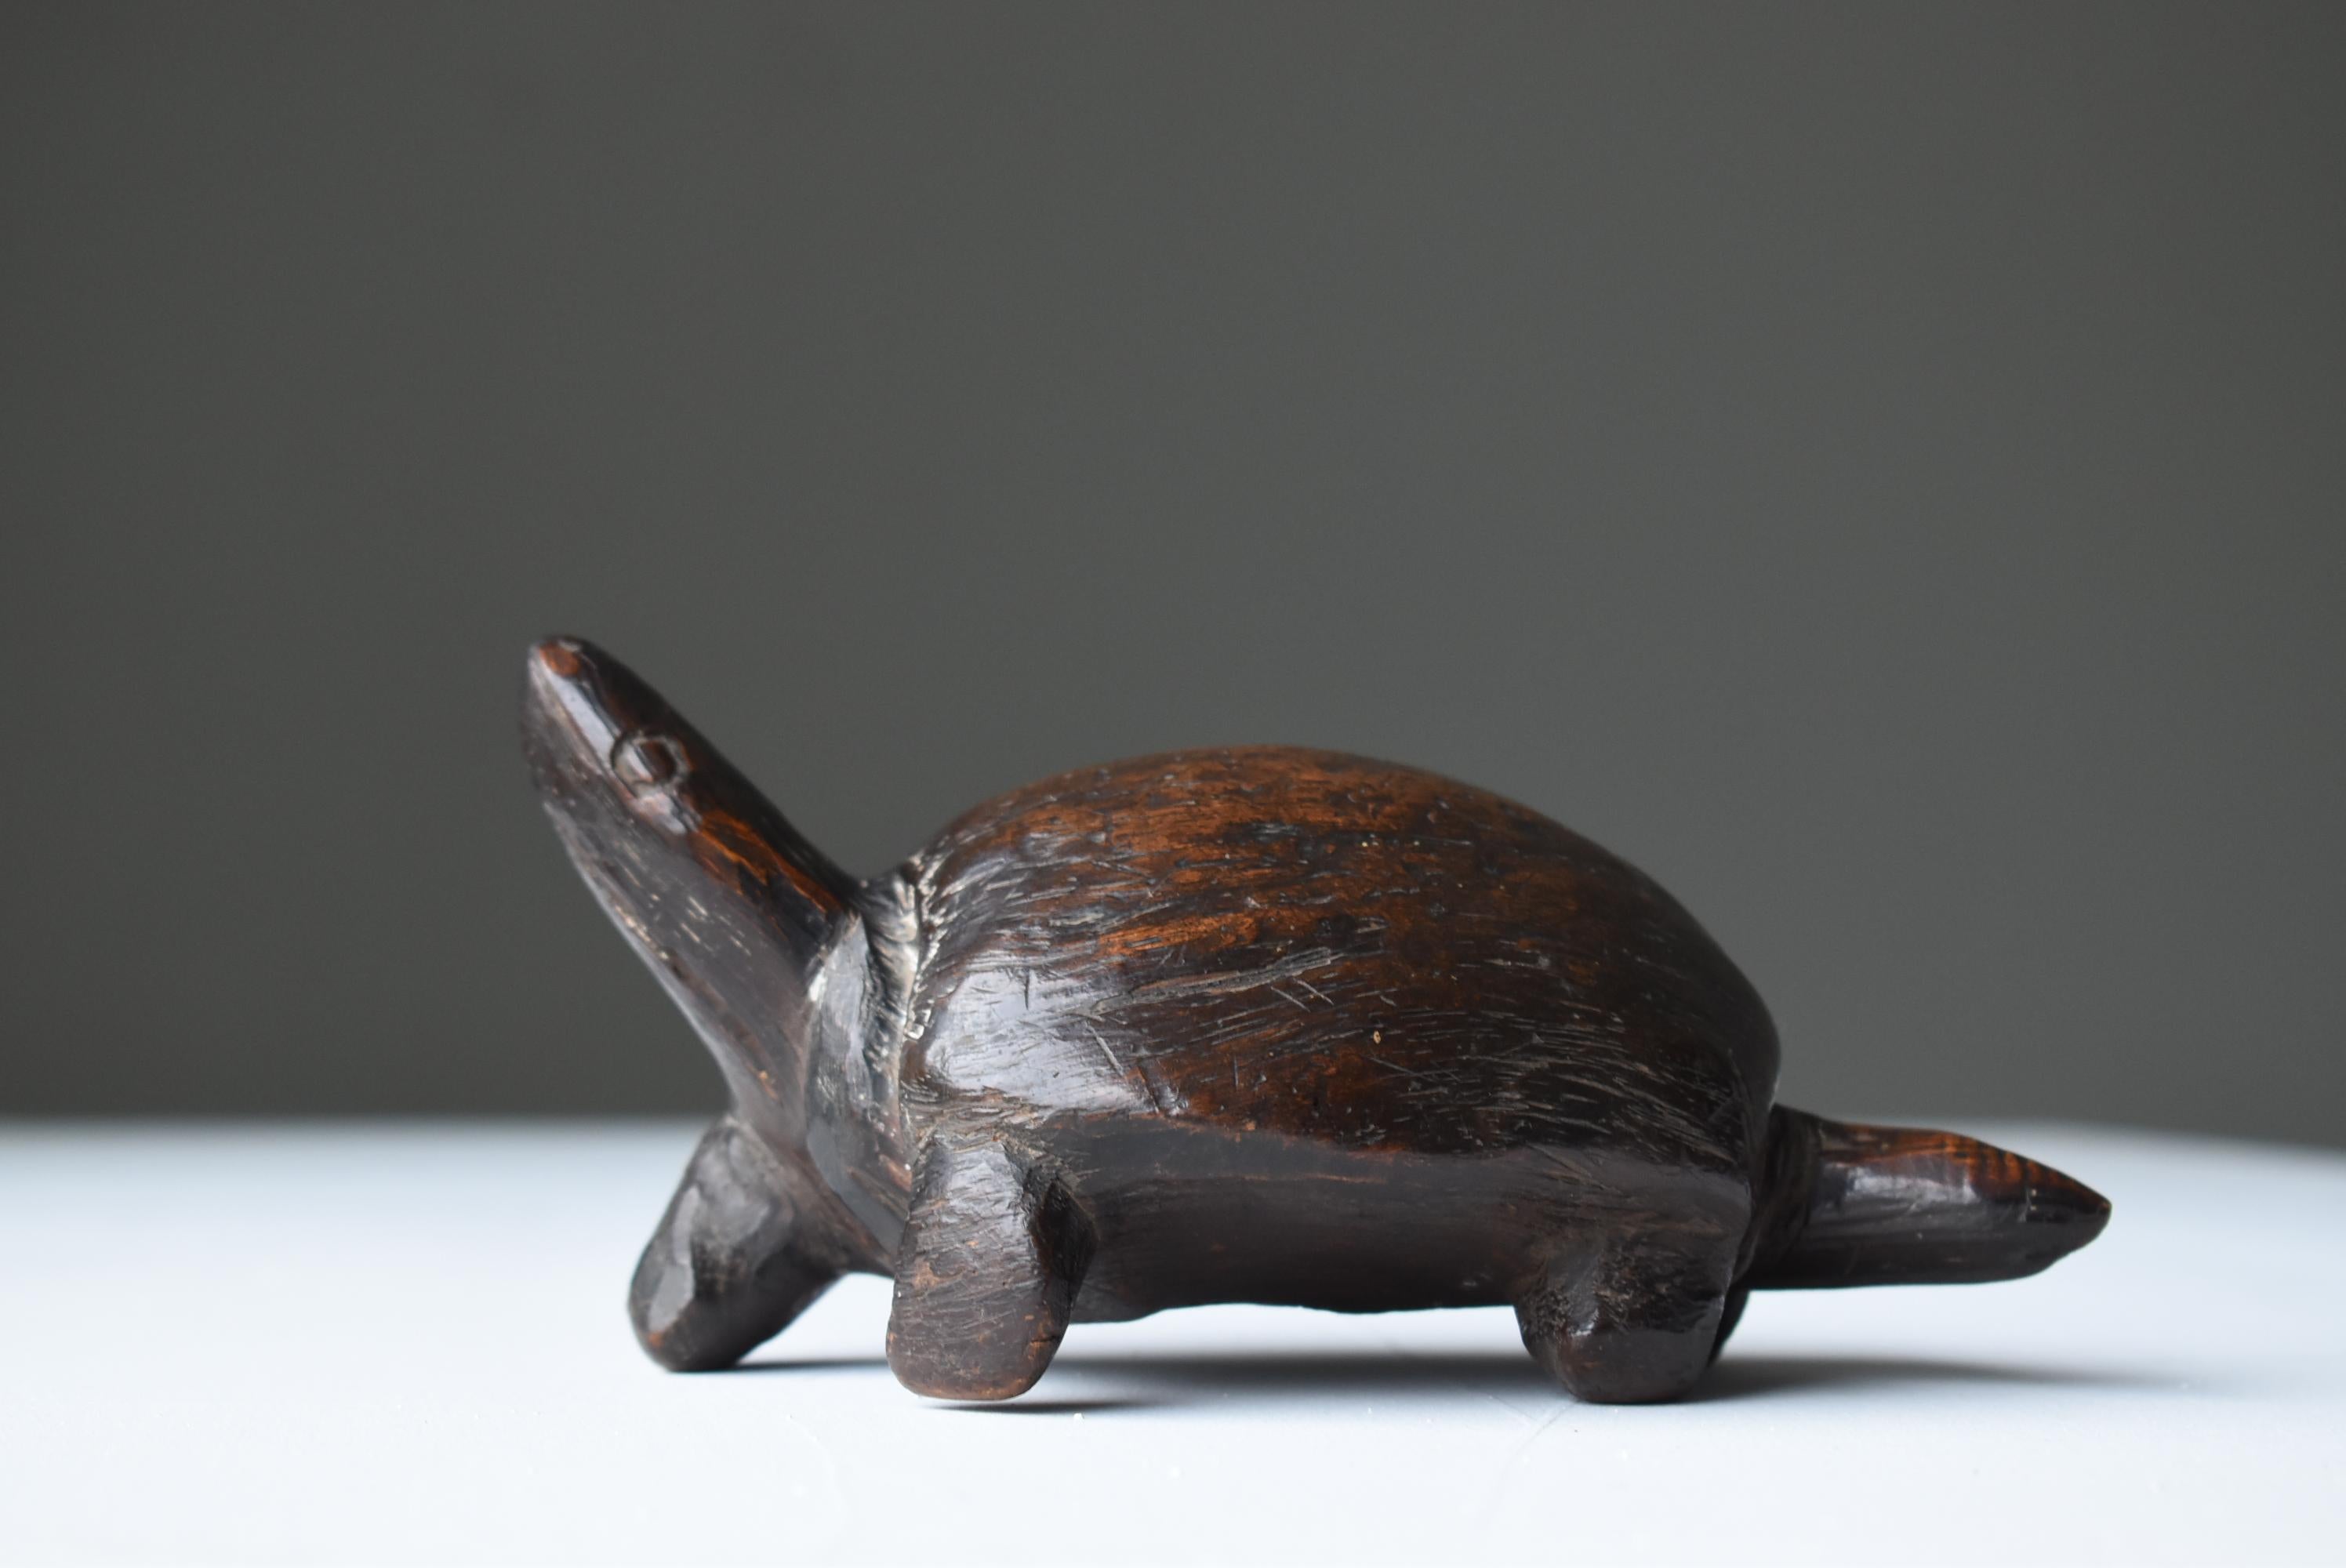 It is a Japanese wood carving turtle.
It is a hand carving using a wooden knob.
It is an item from 1900 to 1920.

The material is unknown, but it has grown to a great taste.
I feel a deep love.

This item is very rare even in Japan.
I highly